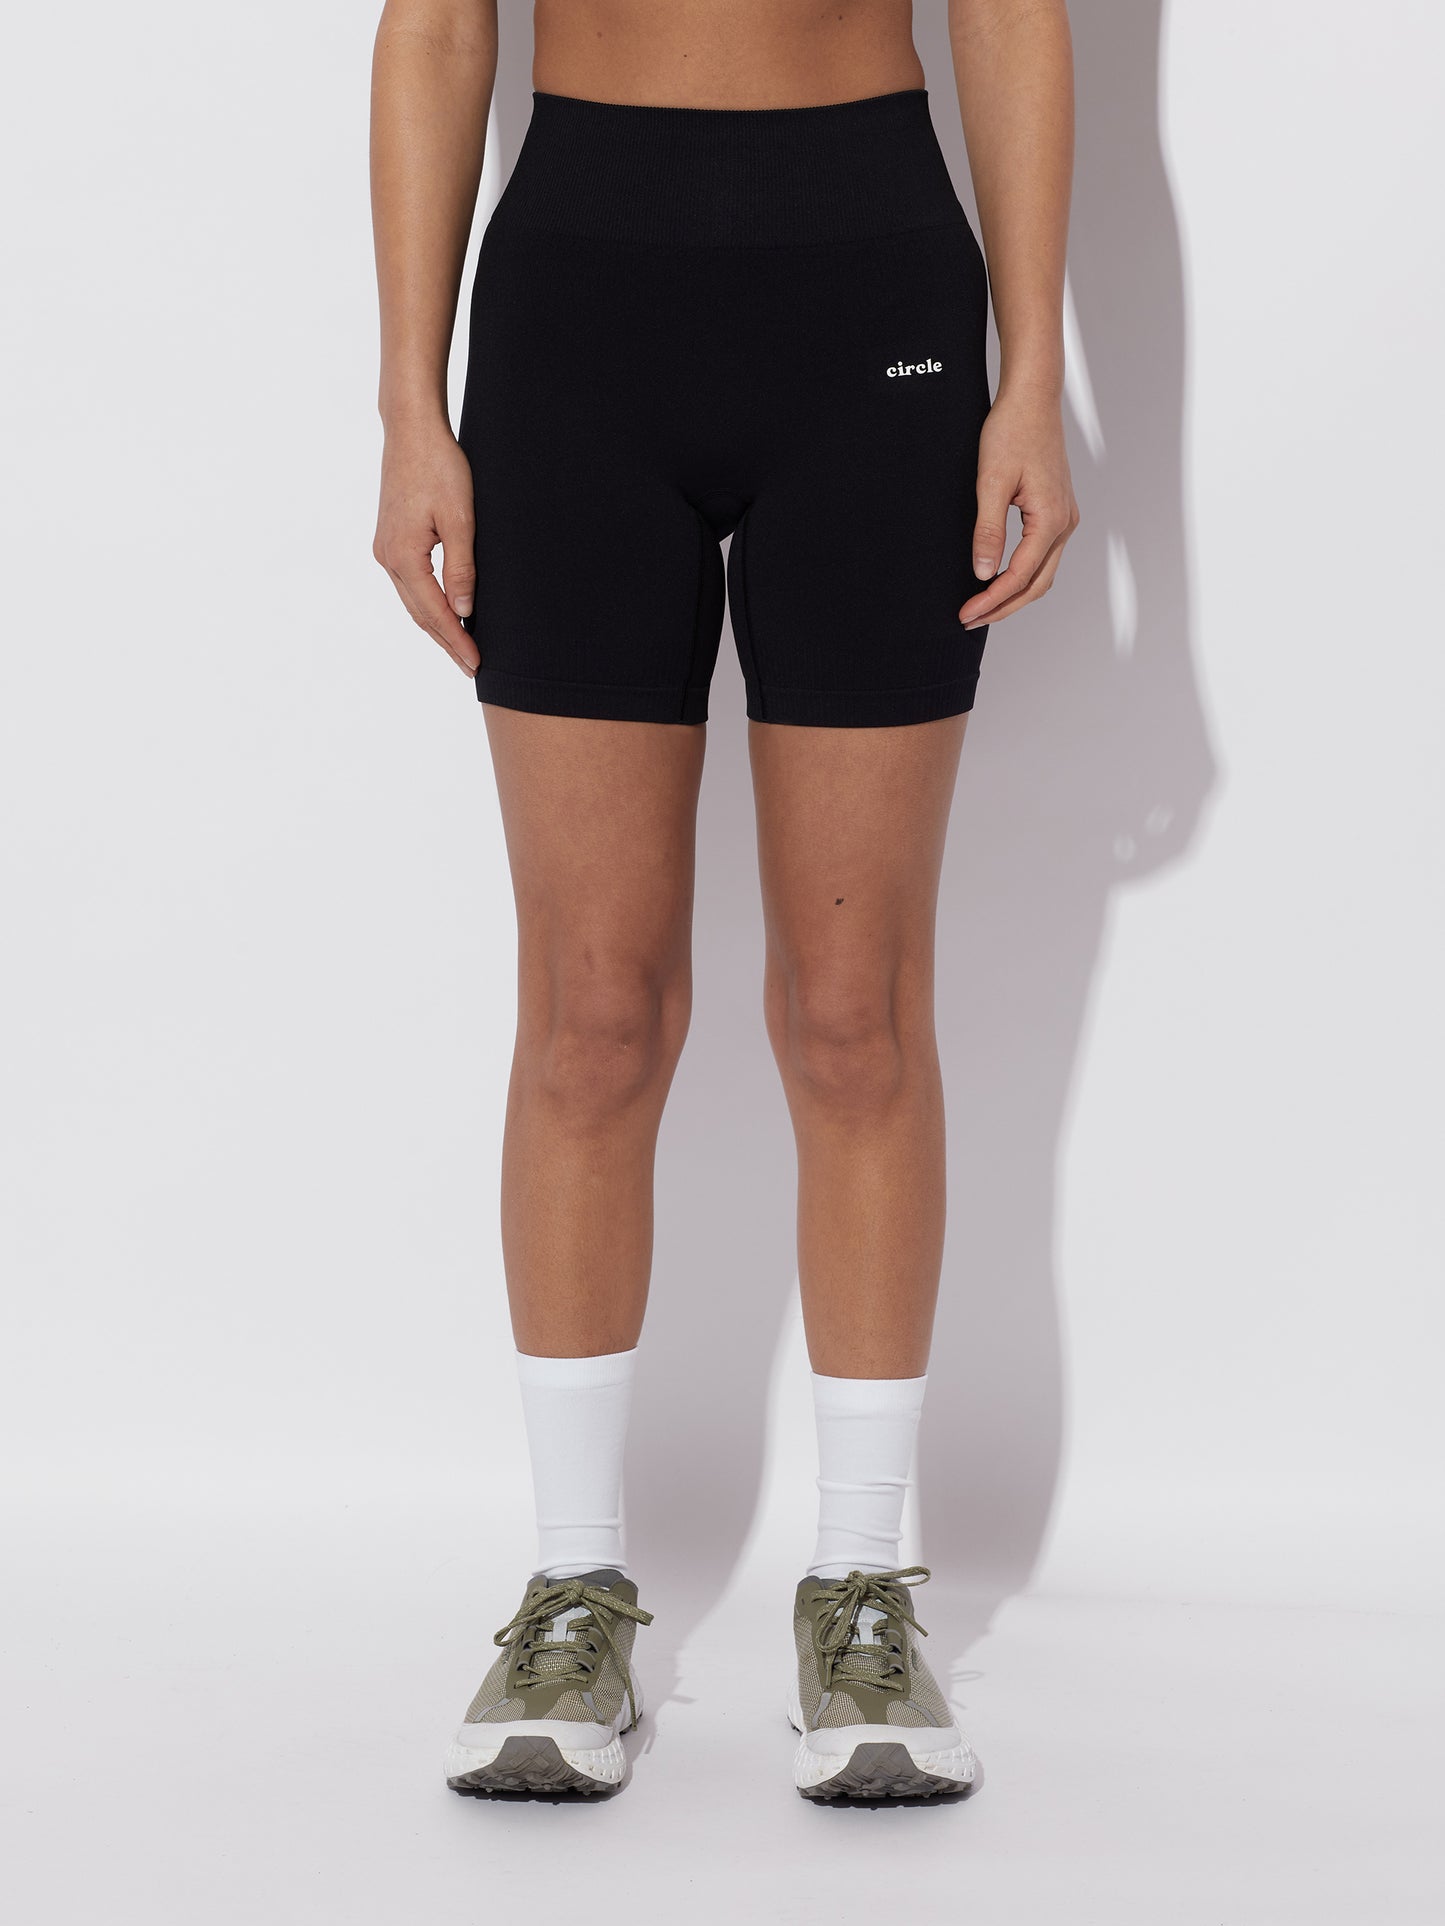 Keep The Flow Seamless Shorts